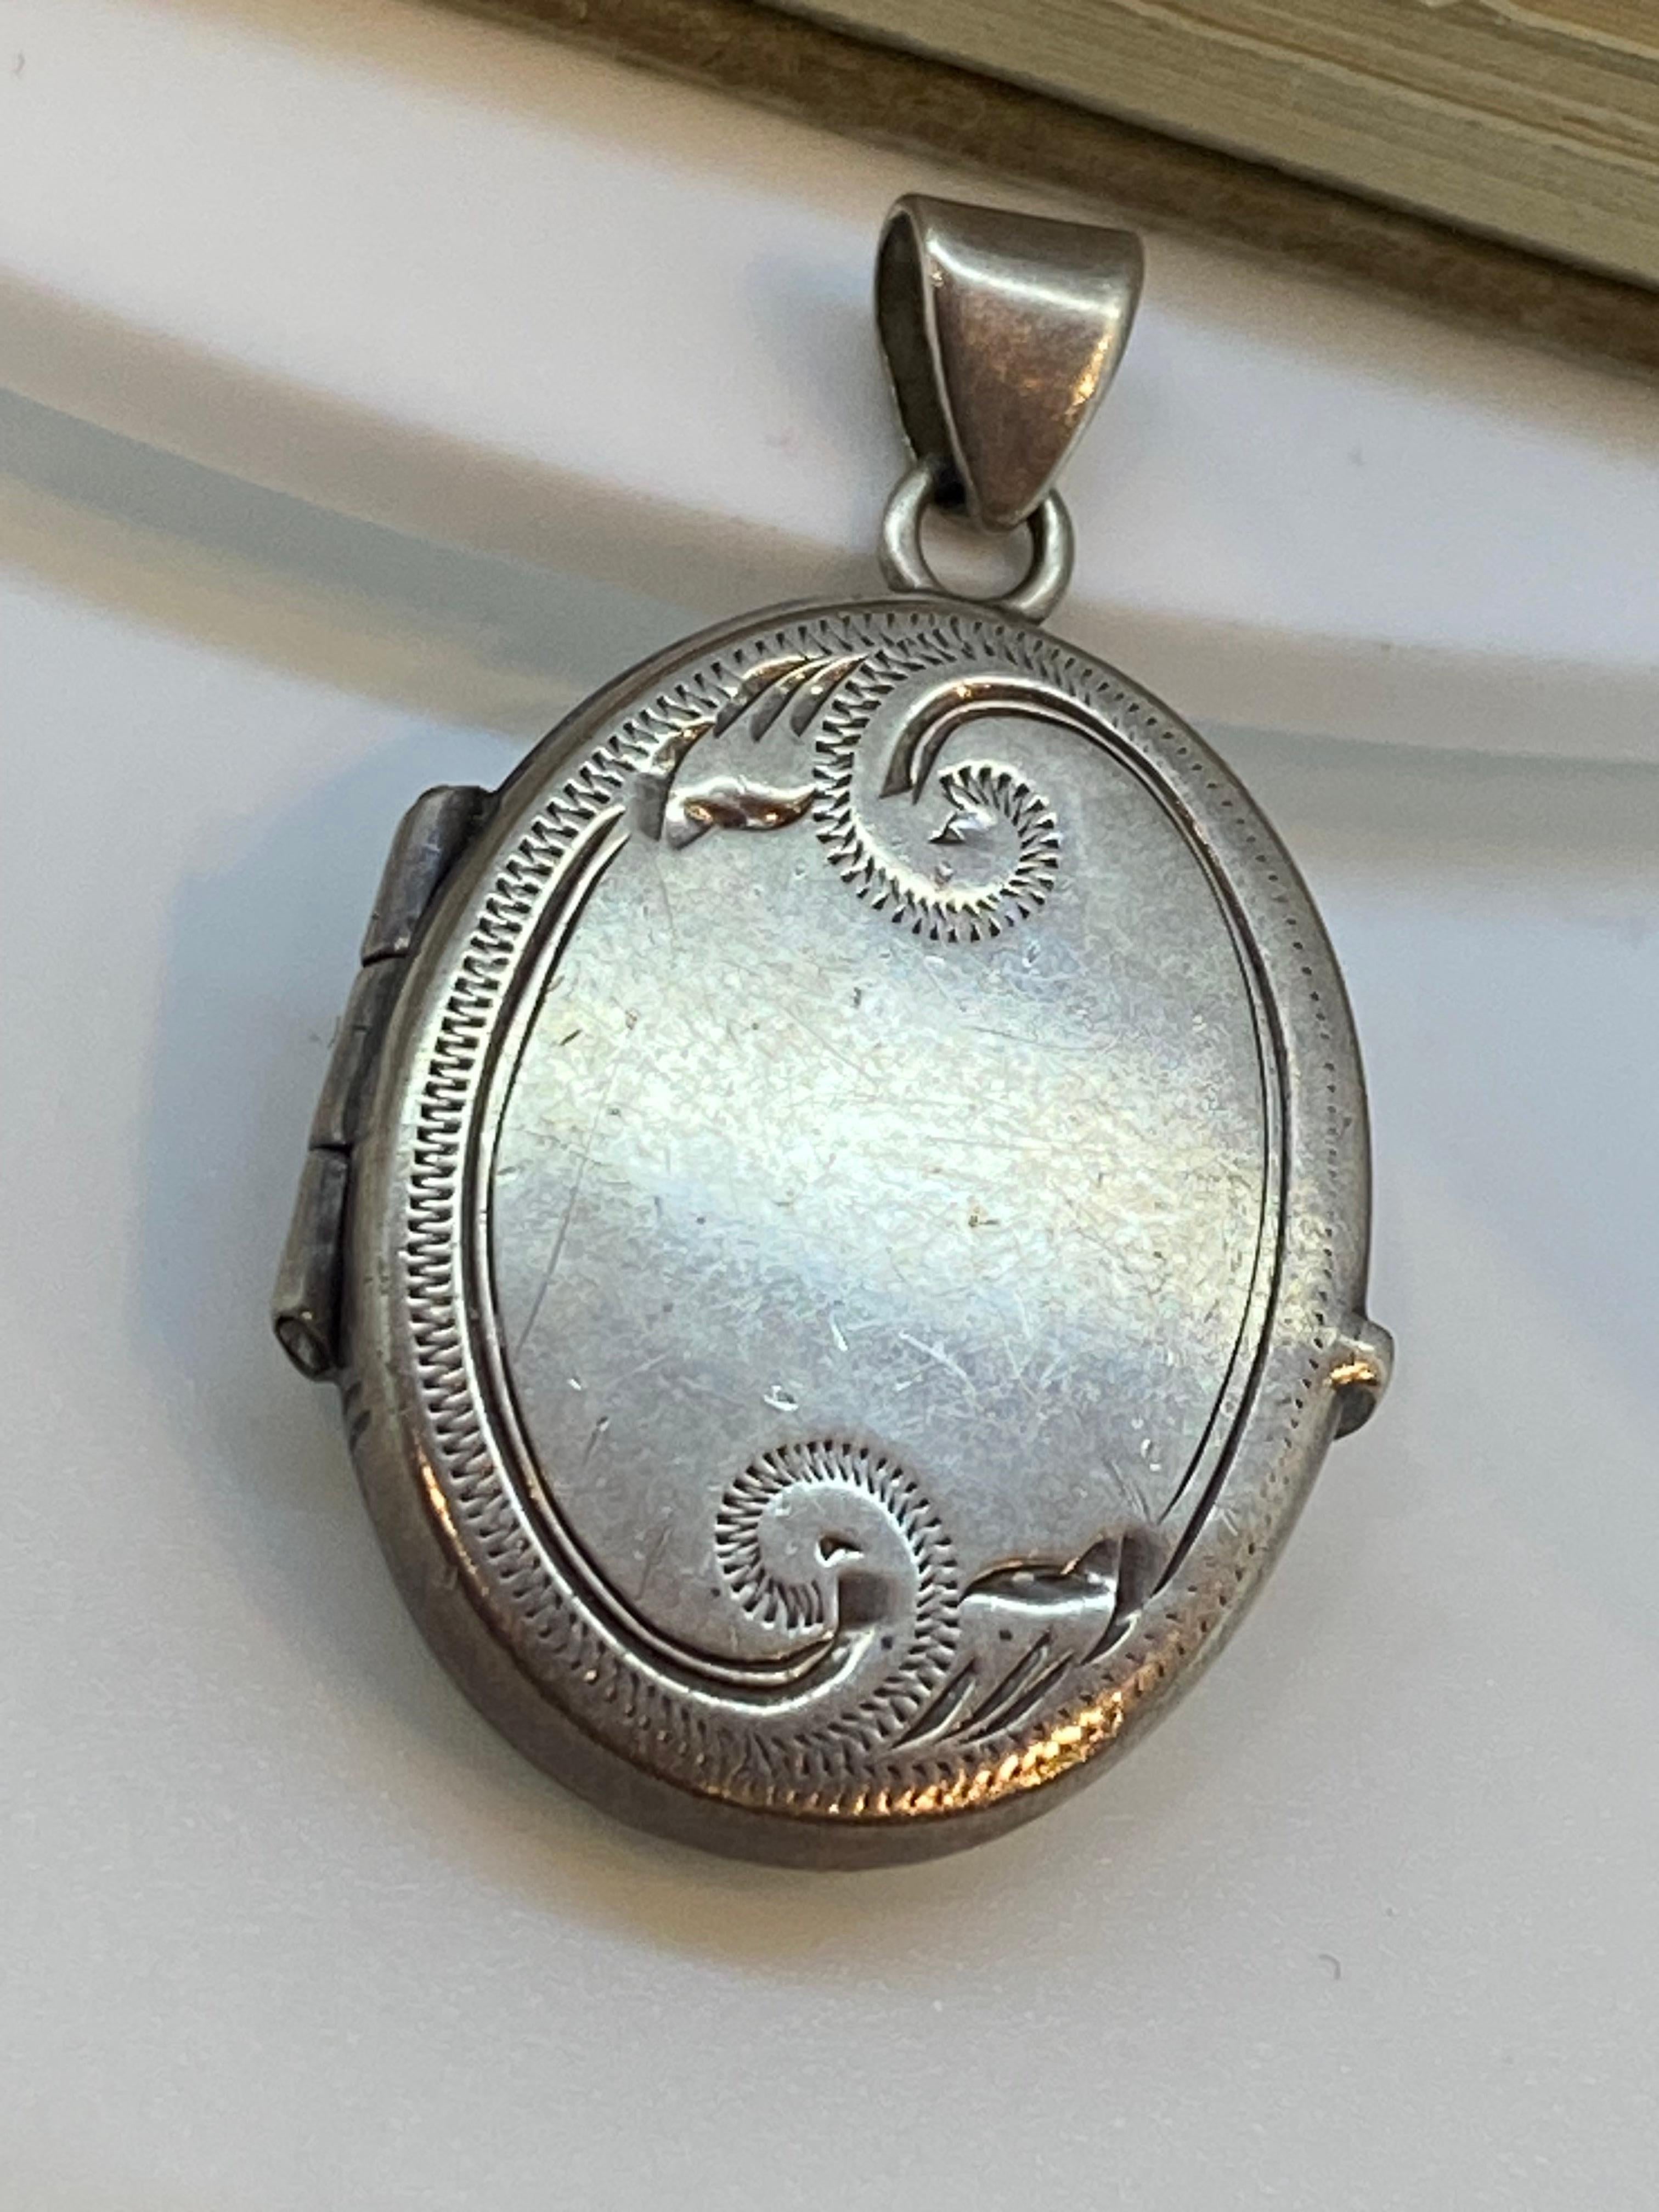 This Finely Engraved Oval Locket is Vintage, 

It opens up to reveal a photo compartment

 

Coming from 1950's,  

this intricate piece is in remarkably great condition - 

jewelry of that era has always been particularly well made & 

this locket